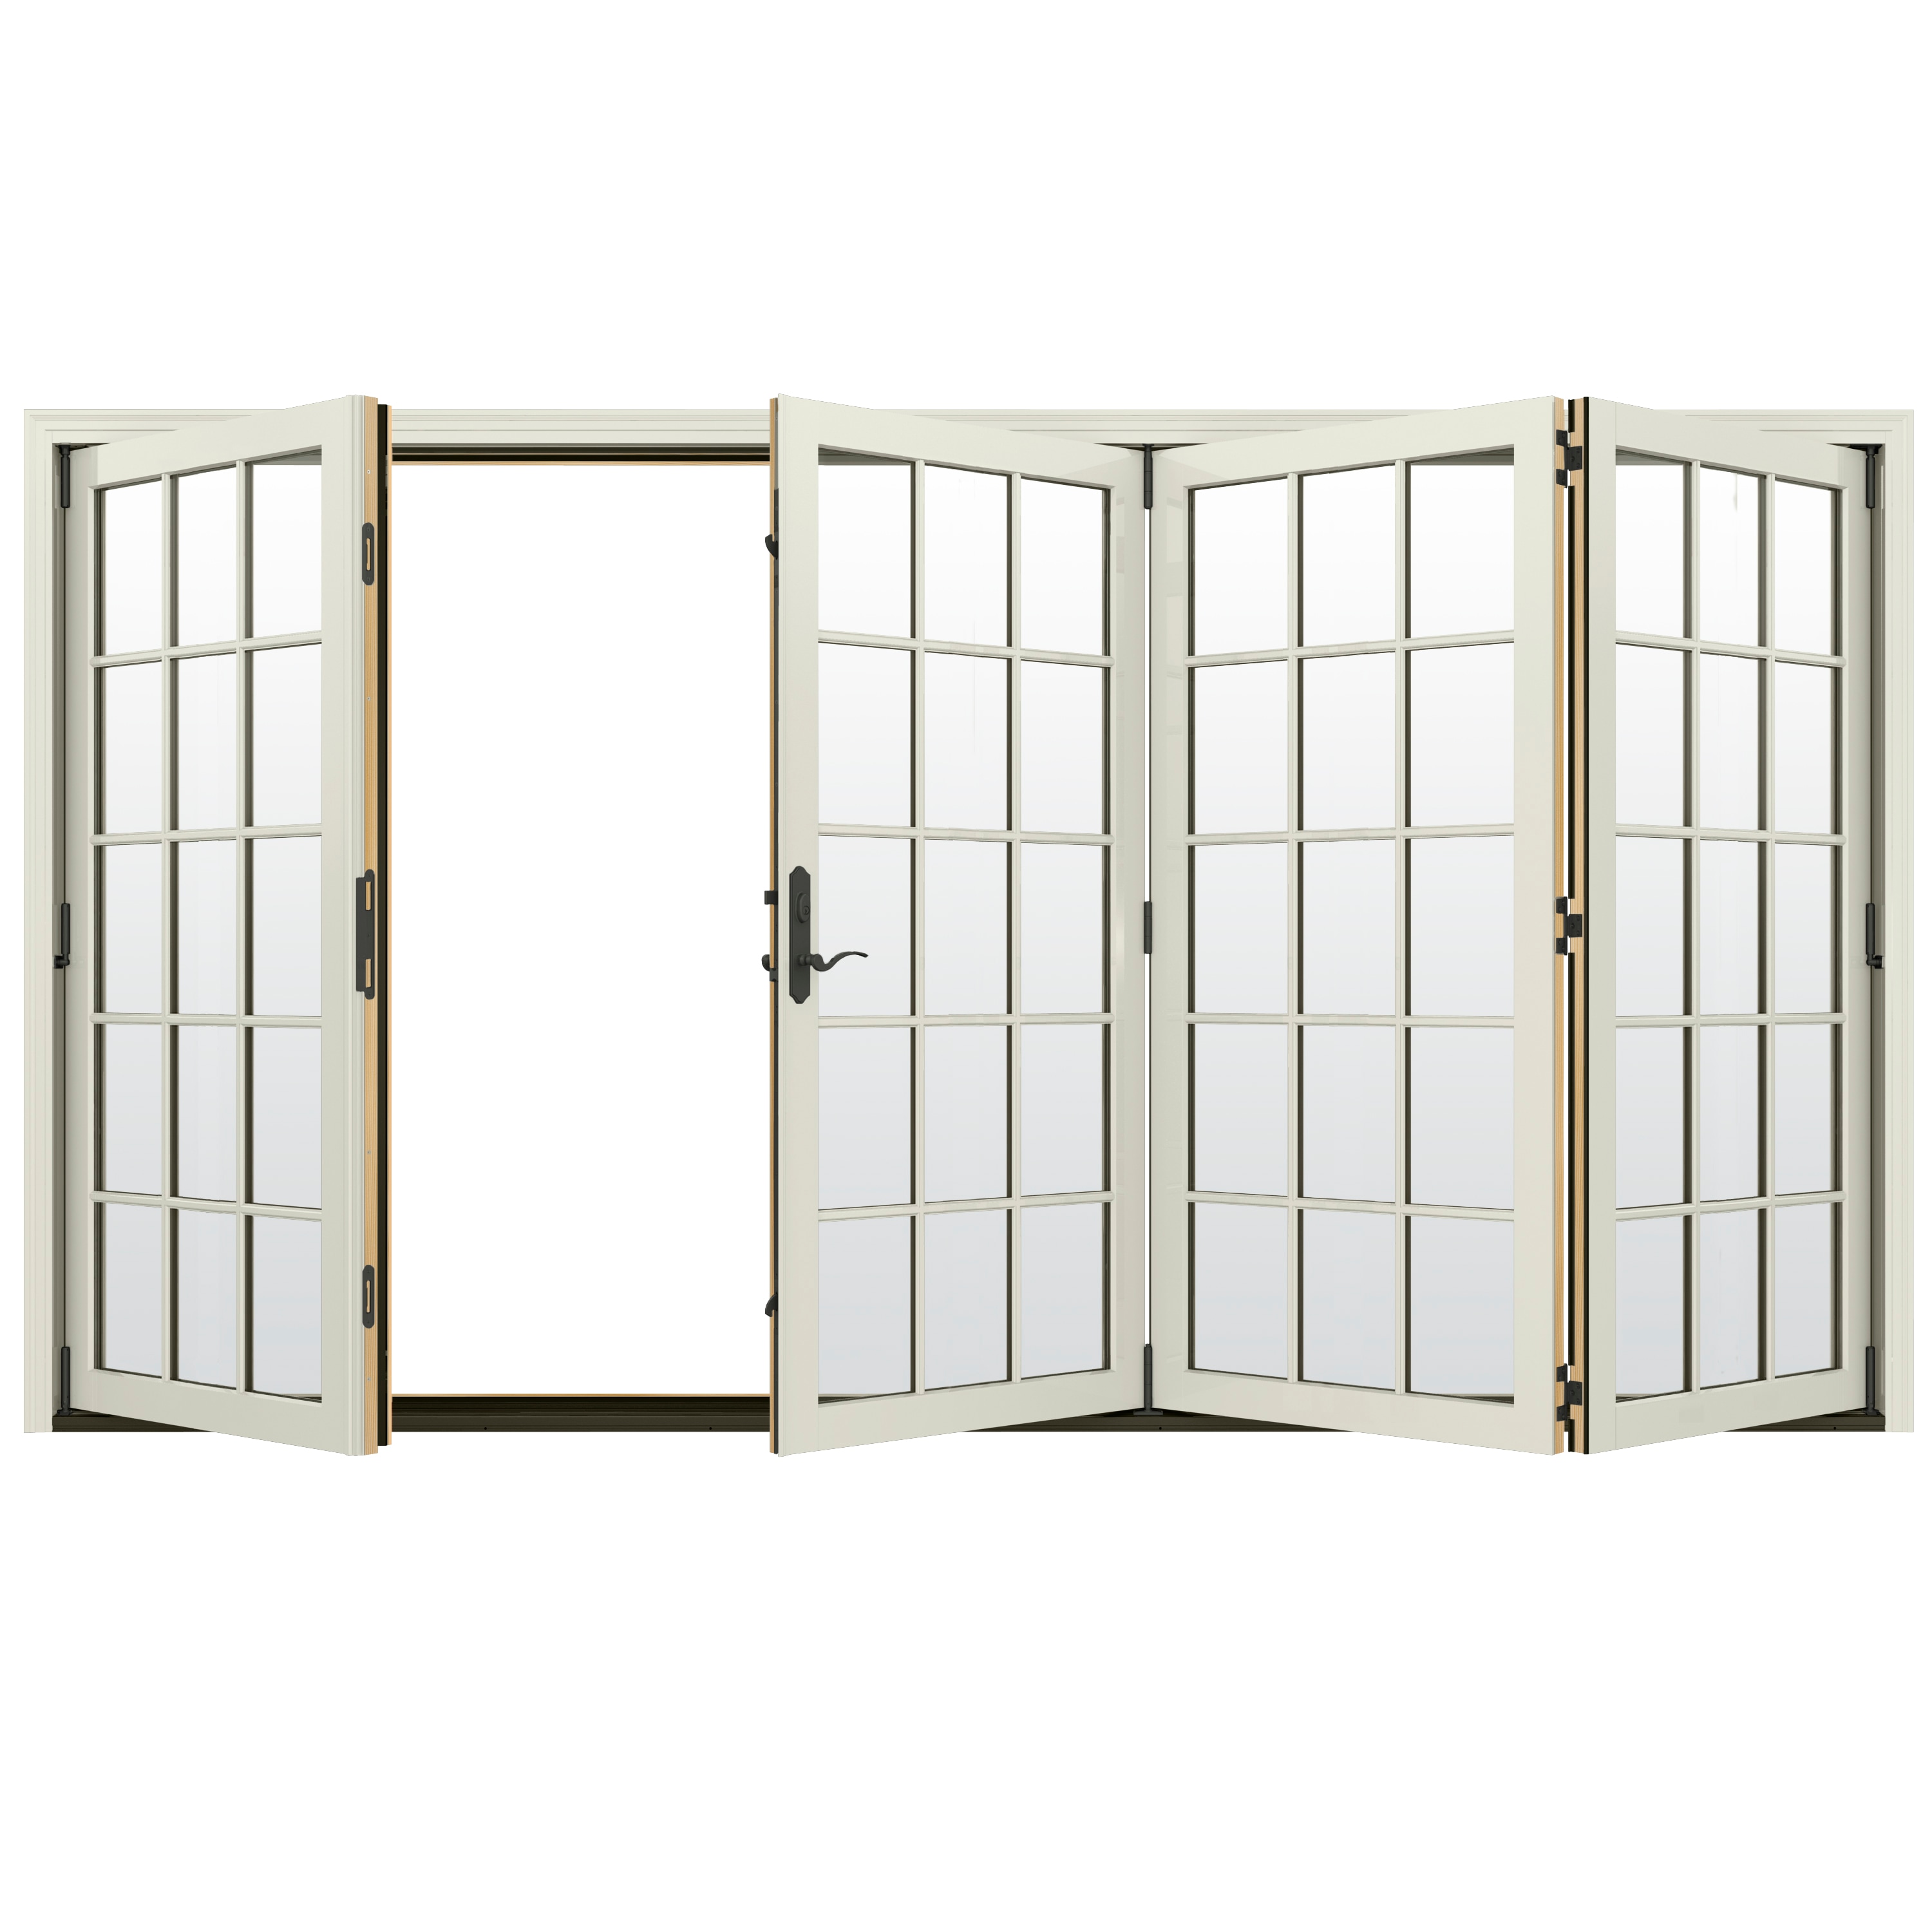 124-in x 80-in Low-e Argon Simulated Divided Light Vanilla Clad-wood Folding Right-Hand Outswing Patio Door in Off-White | - JELD-WEN LOWOLJW247800112